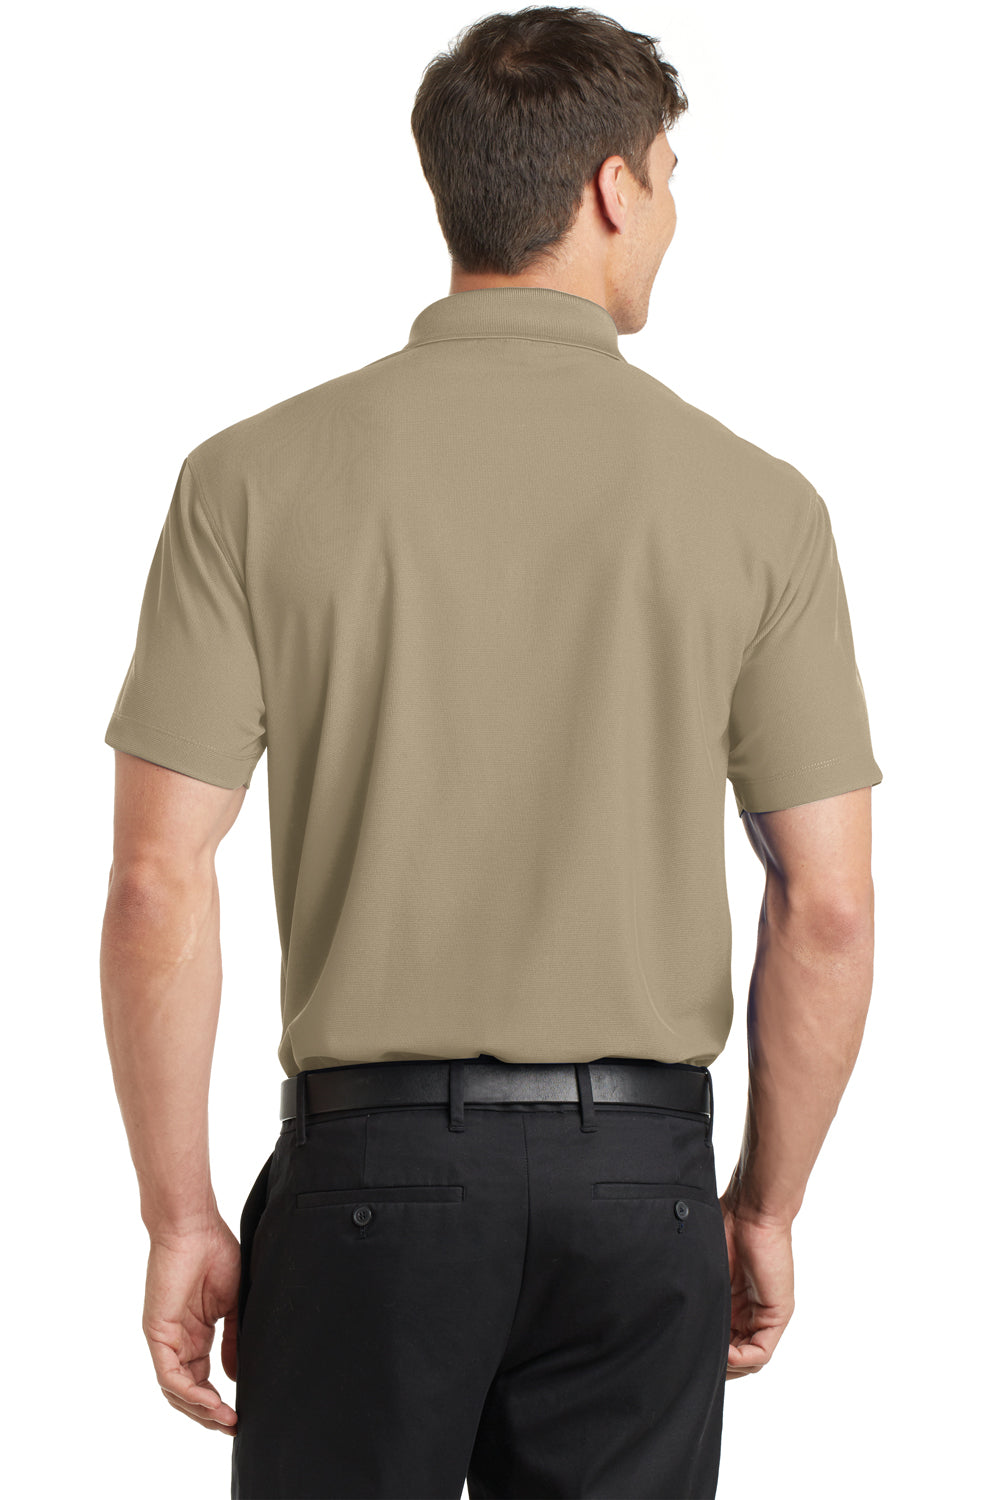 Port Authority K572 Mens Dry Zone Moisture Wicking Short Sleeve Polo Shirt Tan Brown Back